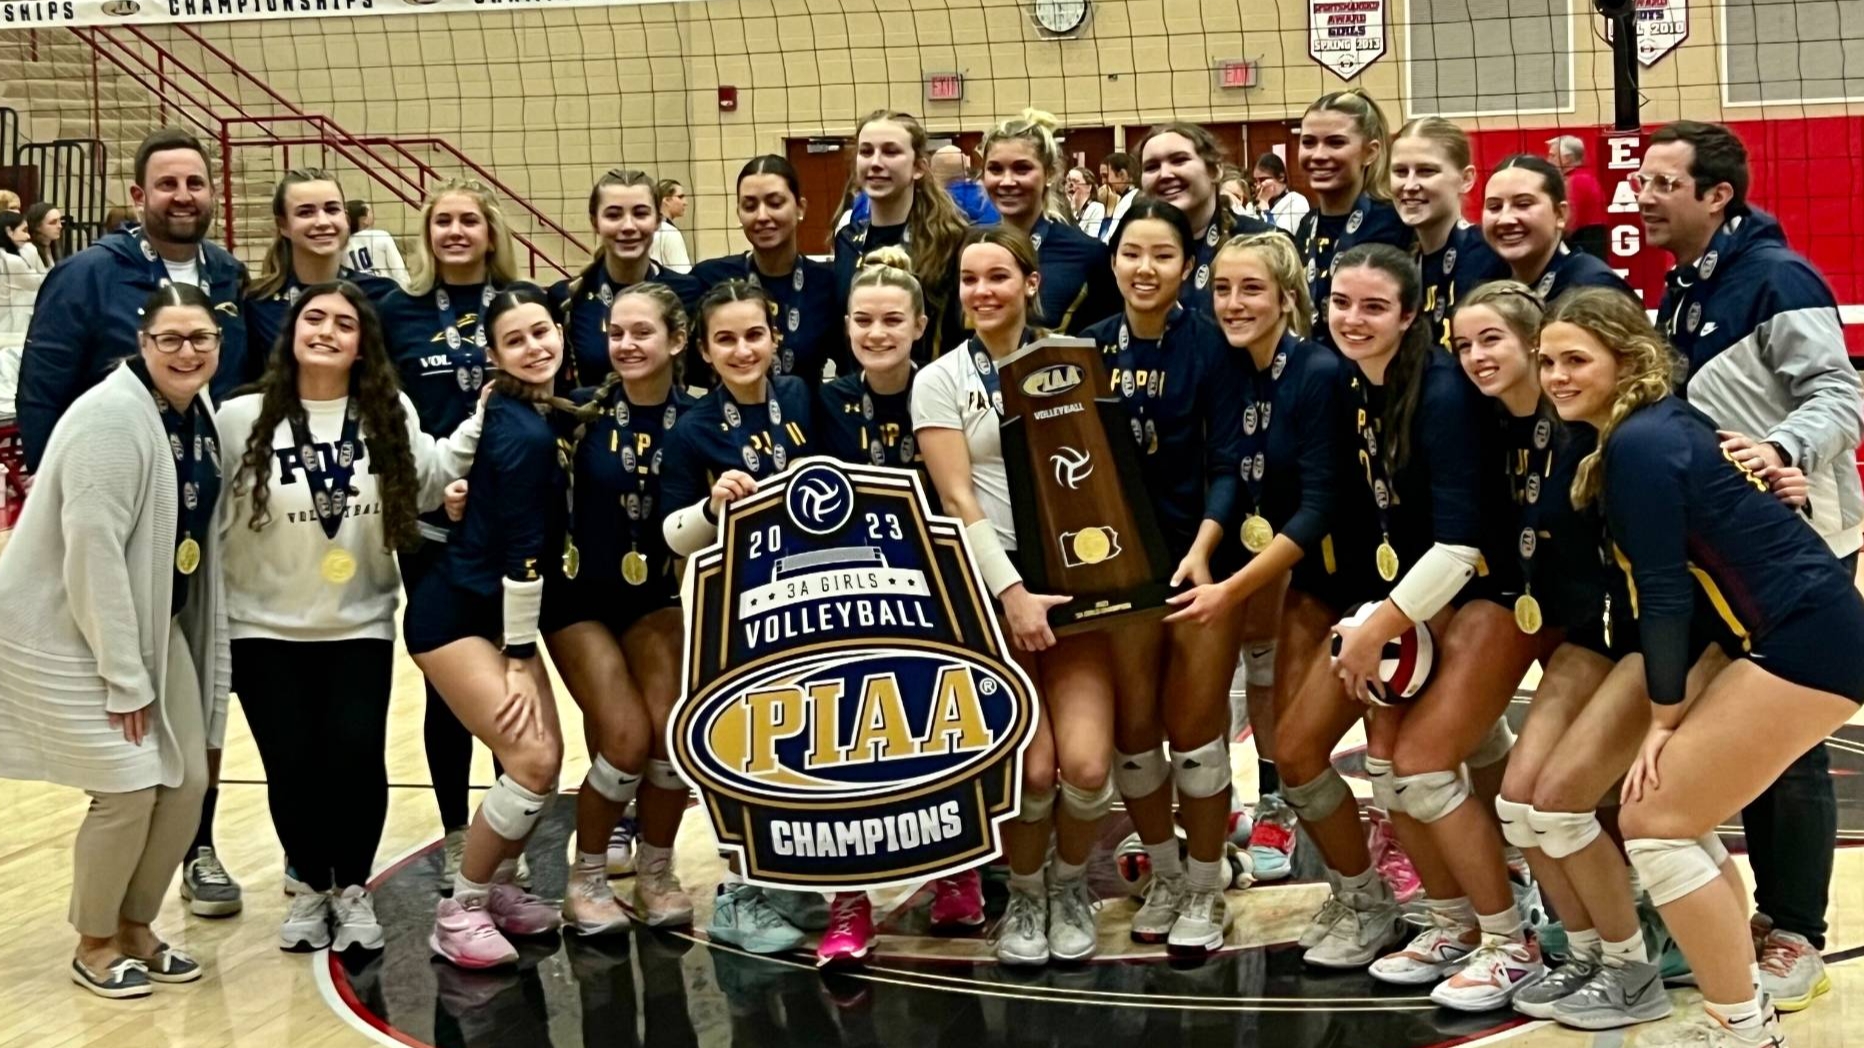 2023 Volleyball 3A State Champions - Content Image for pjphsathletics_org_146221